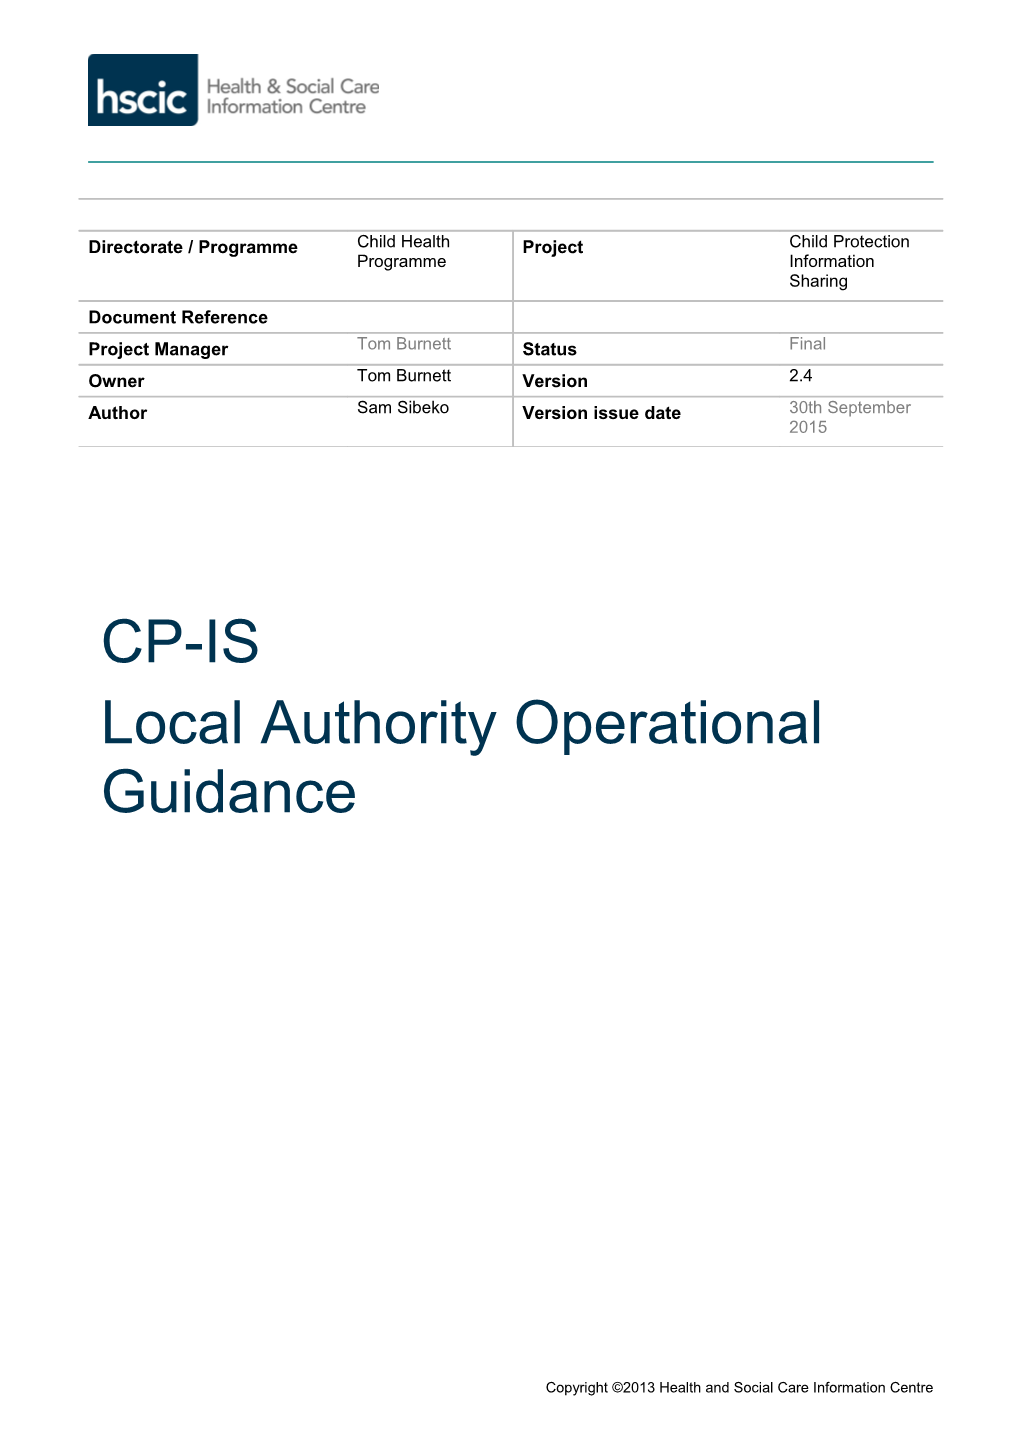 CP-IS Local Authority Guidance V0 8